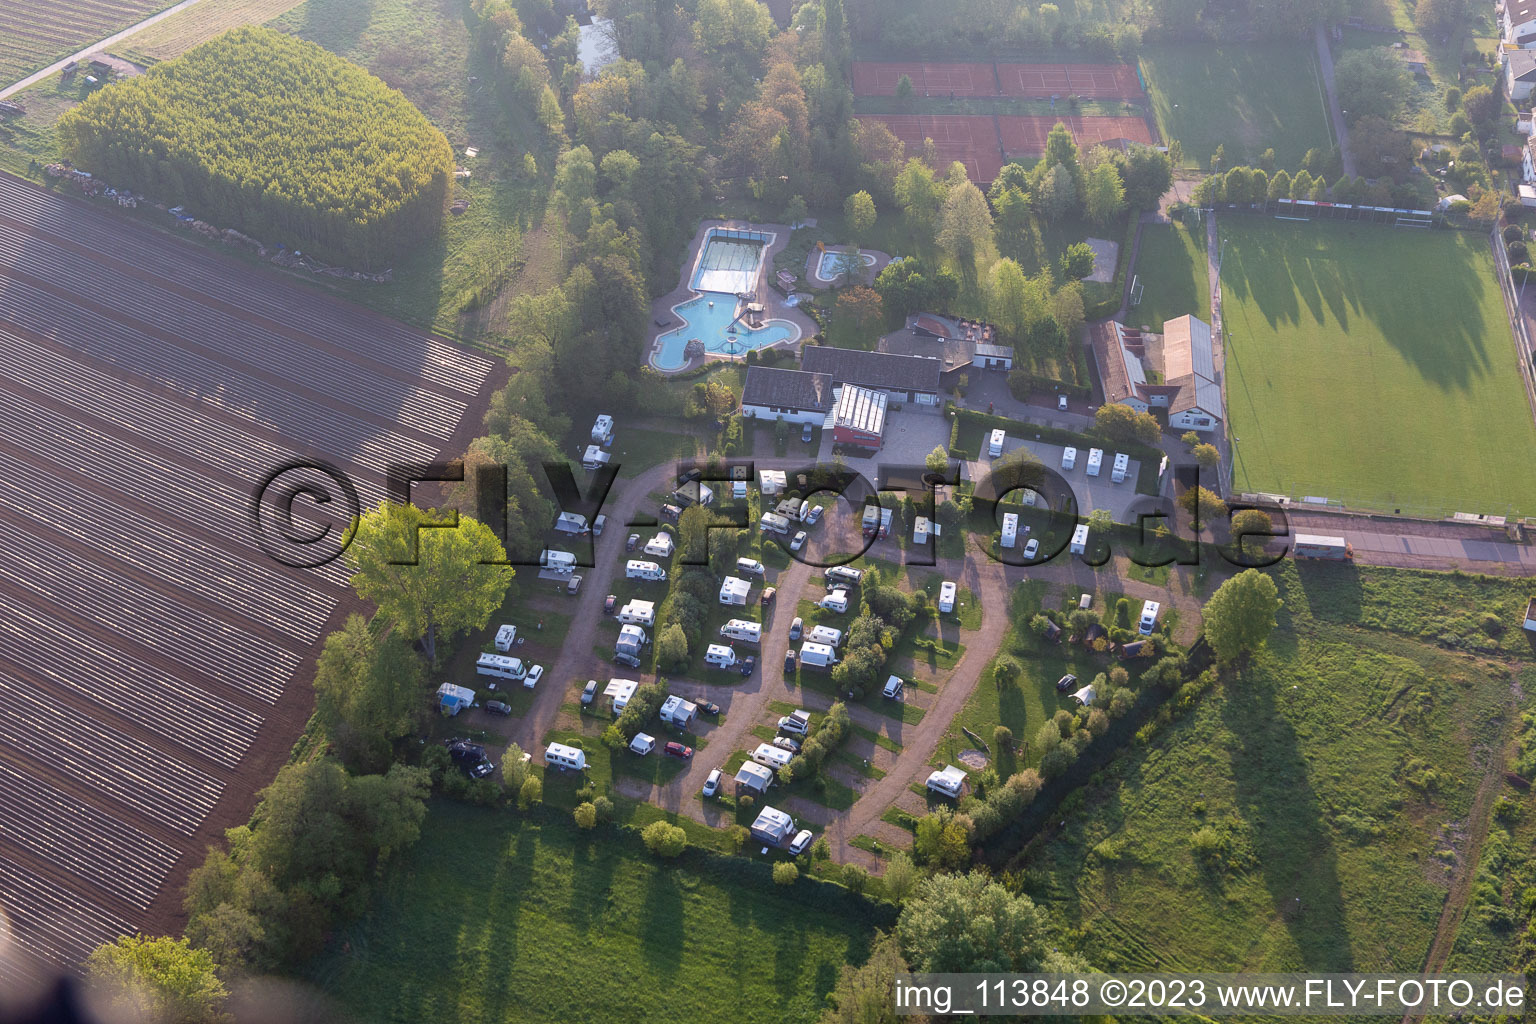 Aerial view of Camping at the outdoor pool Ingenheim in the district Ingenheim in Billigheim-Ingenheim in the state Rhineland-Palatinate, Germany